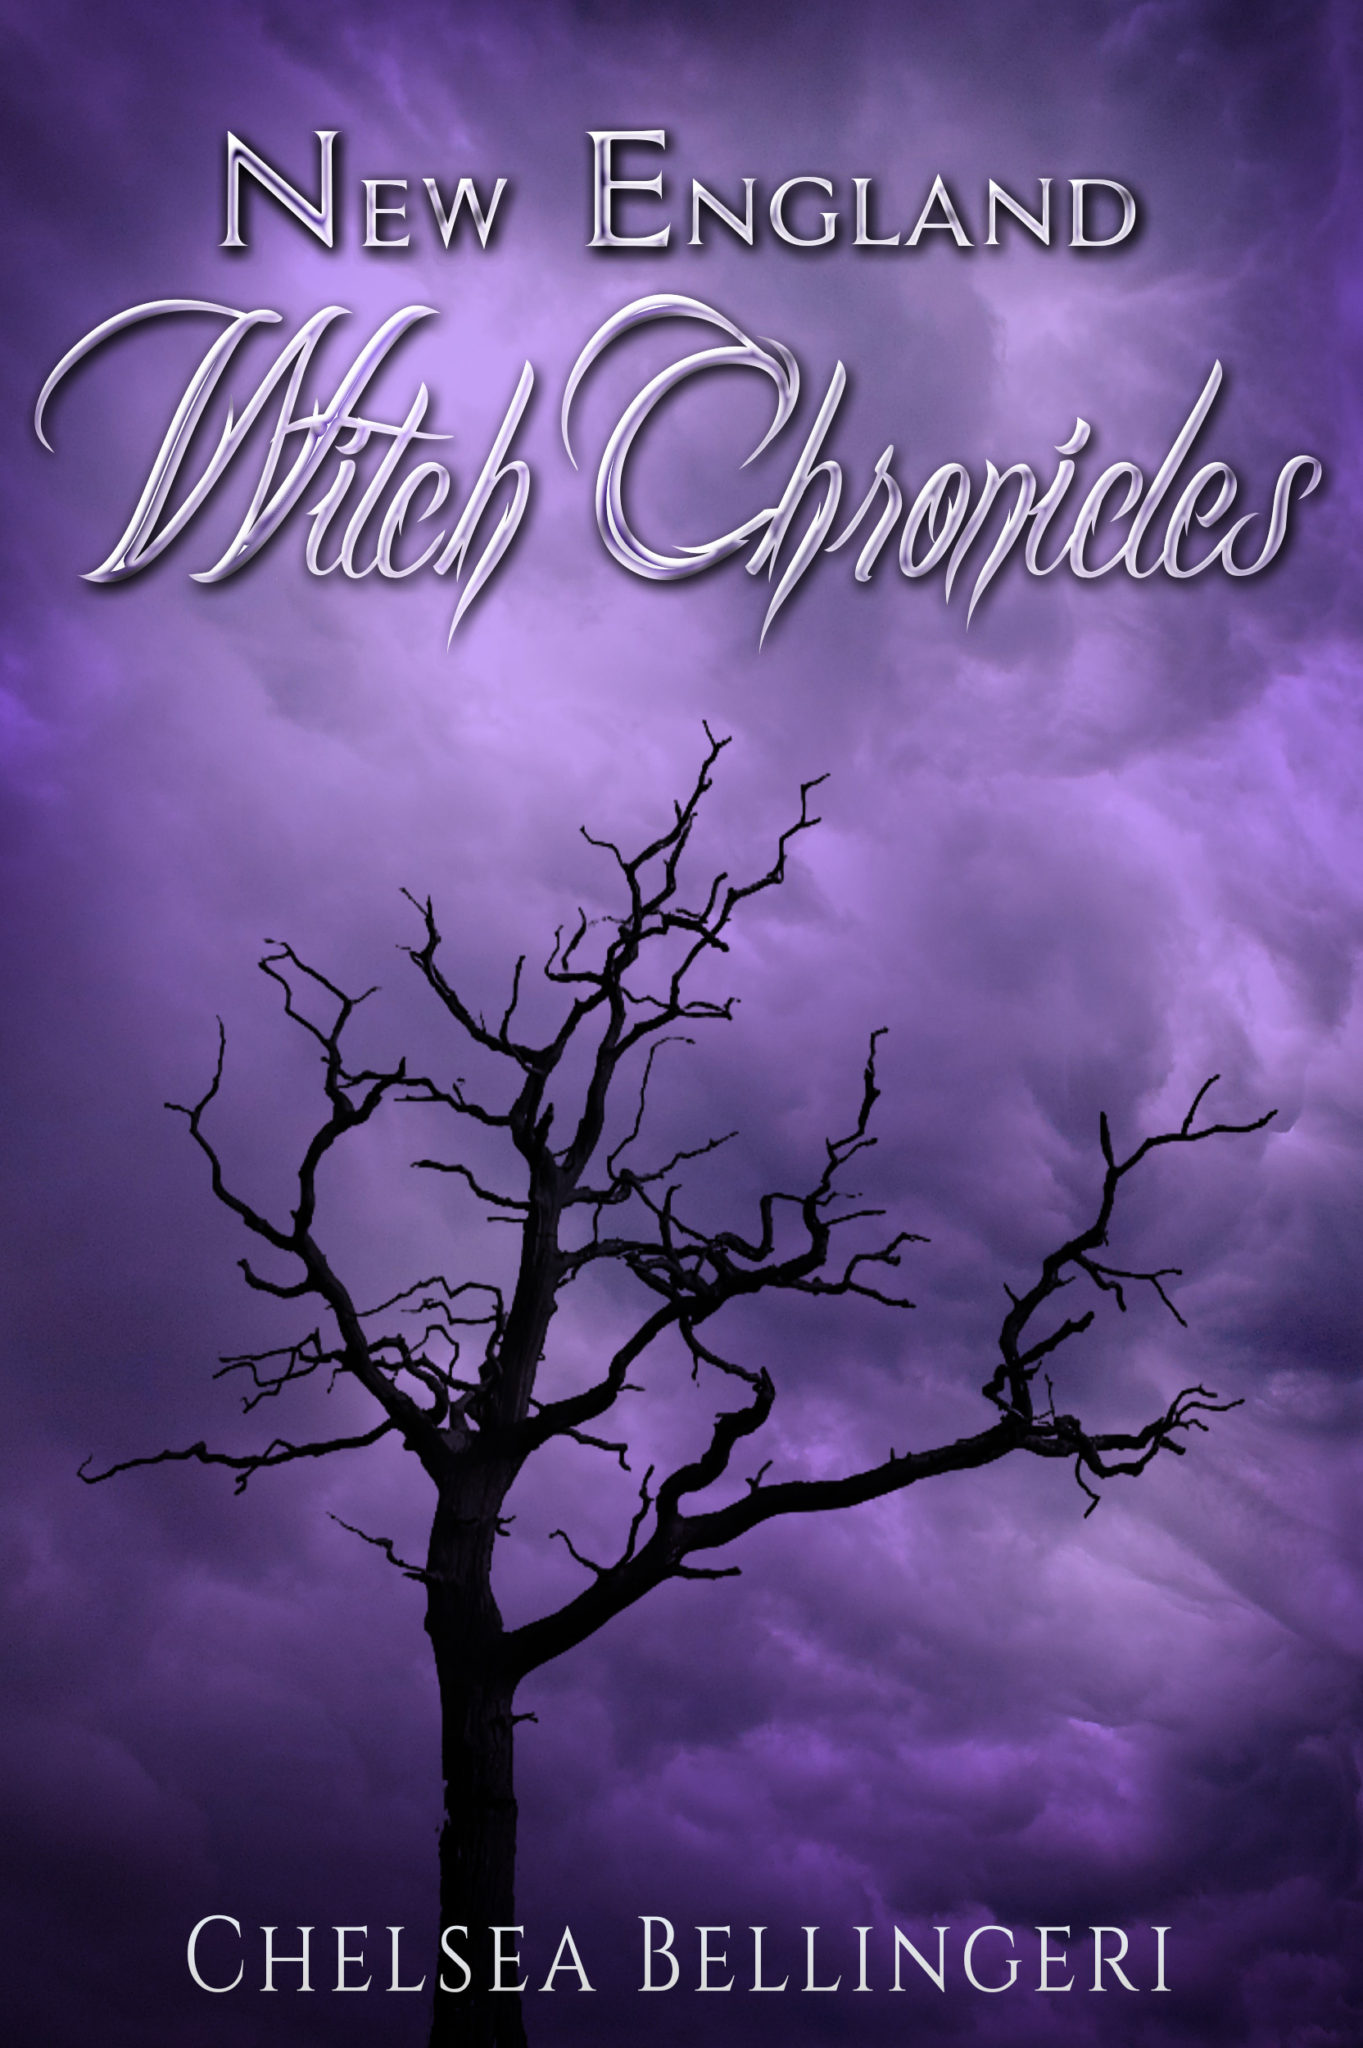 New England Witch Chronicles by Chelsea Bellingeri